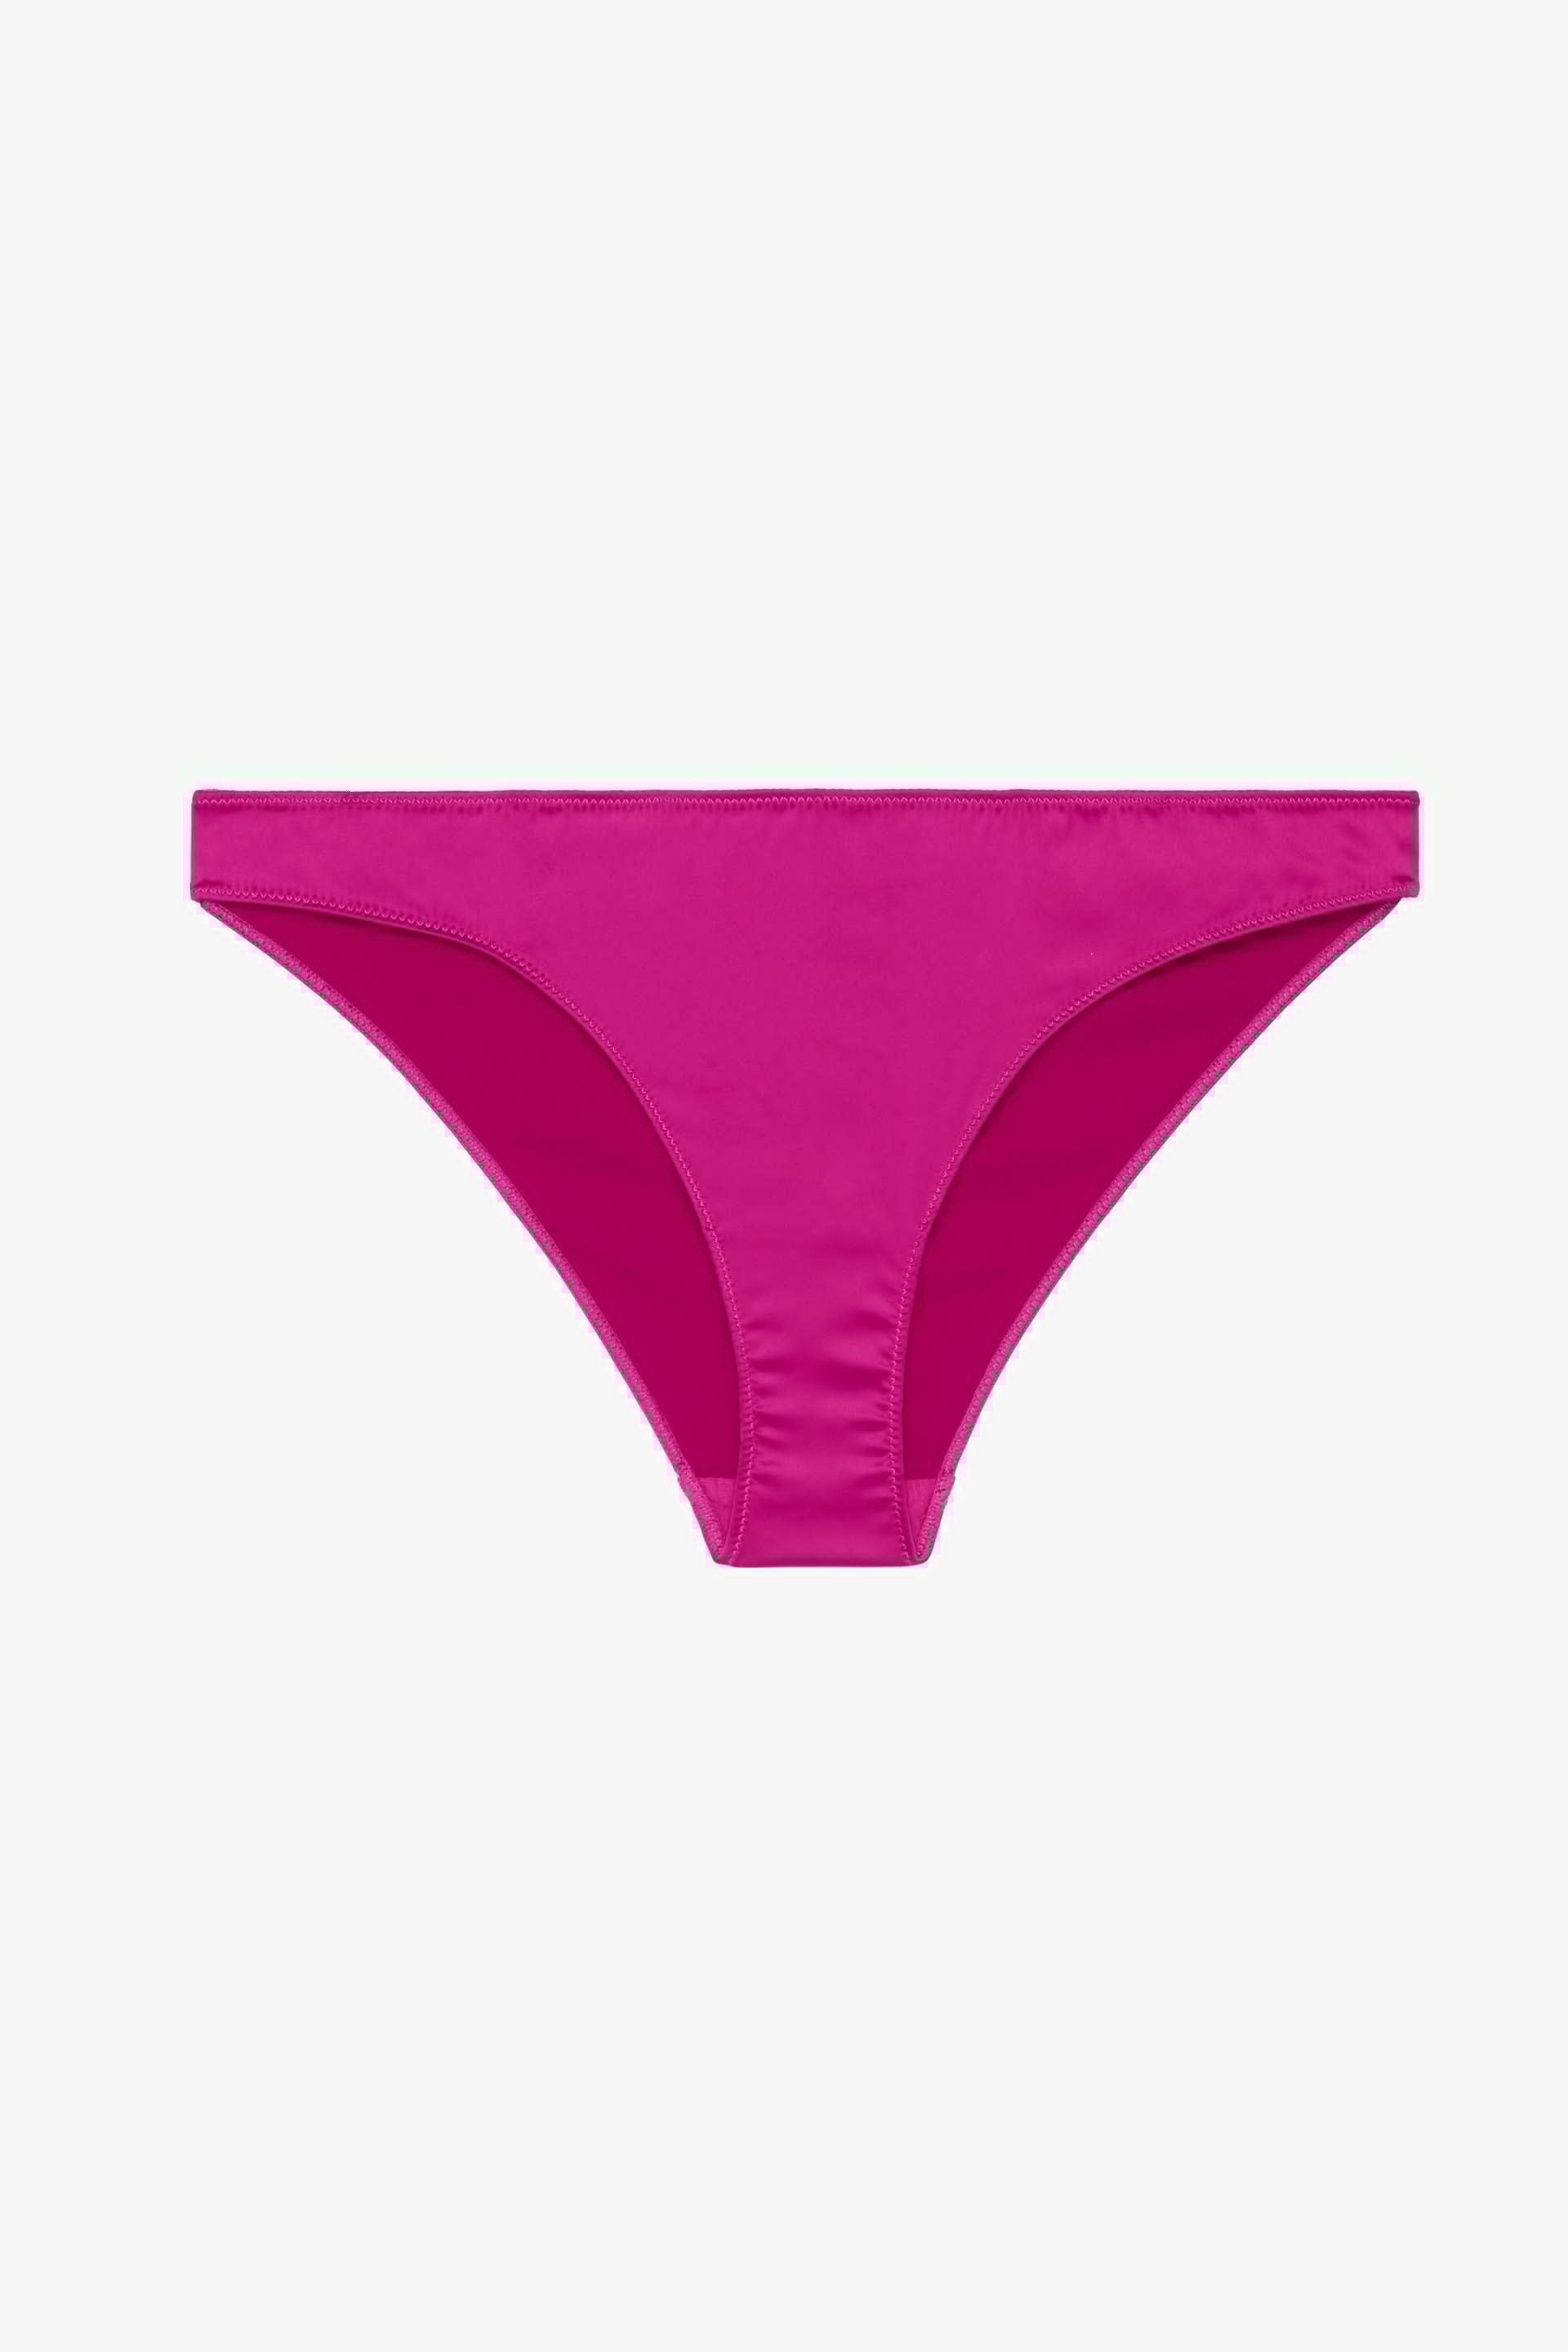 SATIN EFFECT PANTIES LIMITED EDITION by ZARA